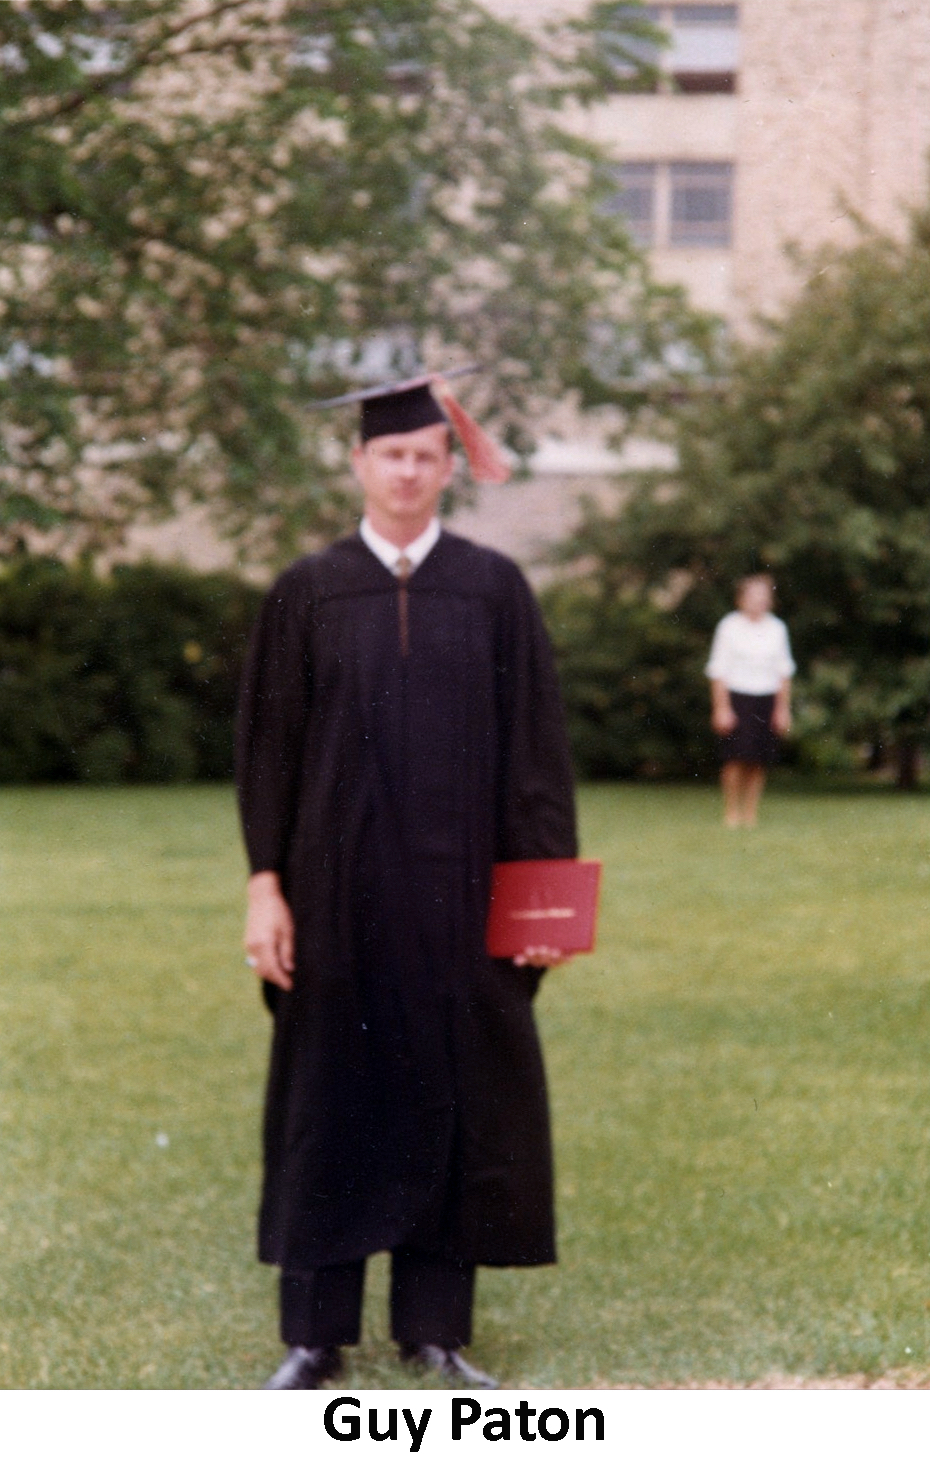 Guy Paton in his graduation robes standing on a lawn
              with trees and a tall building behind him